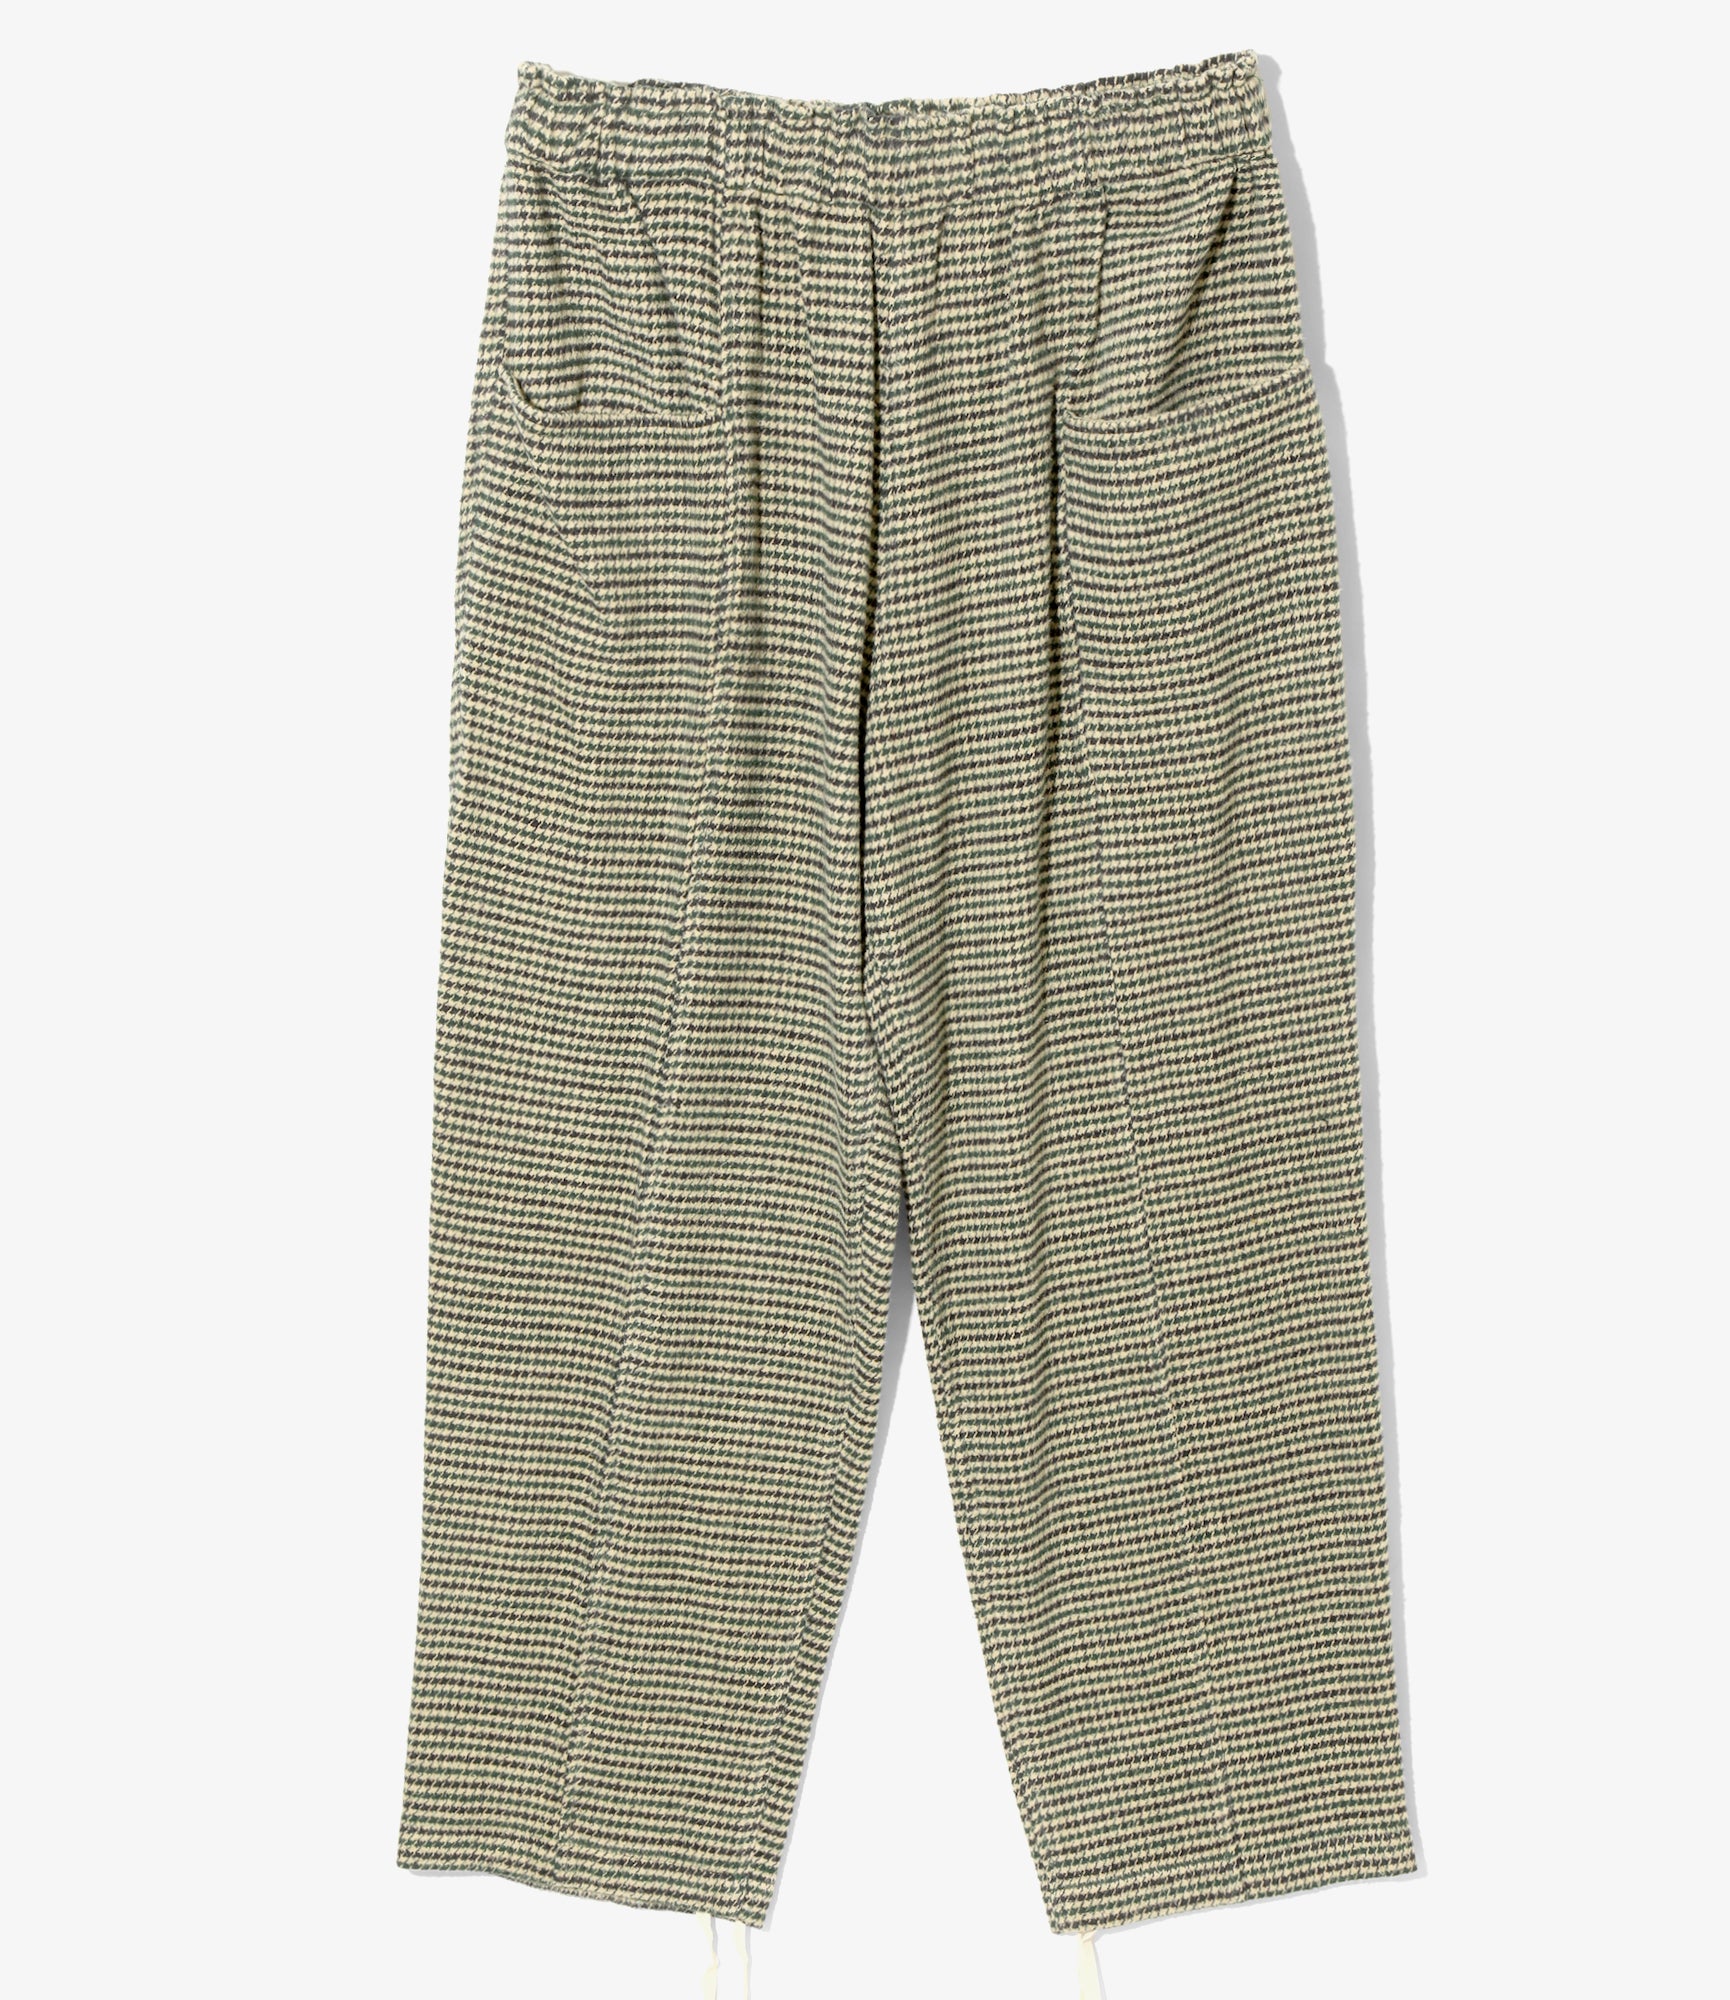 South2 West8 Army String Pant - Cotton Flannel / Houndstooth - Grn/Beg/Blk